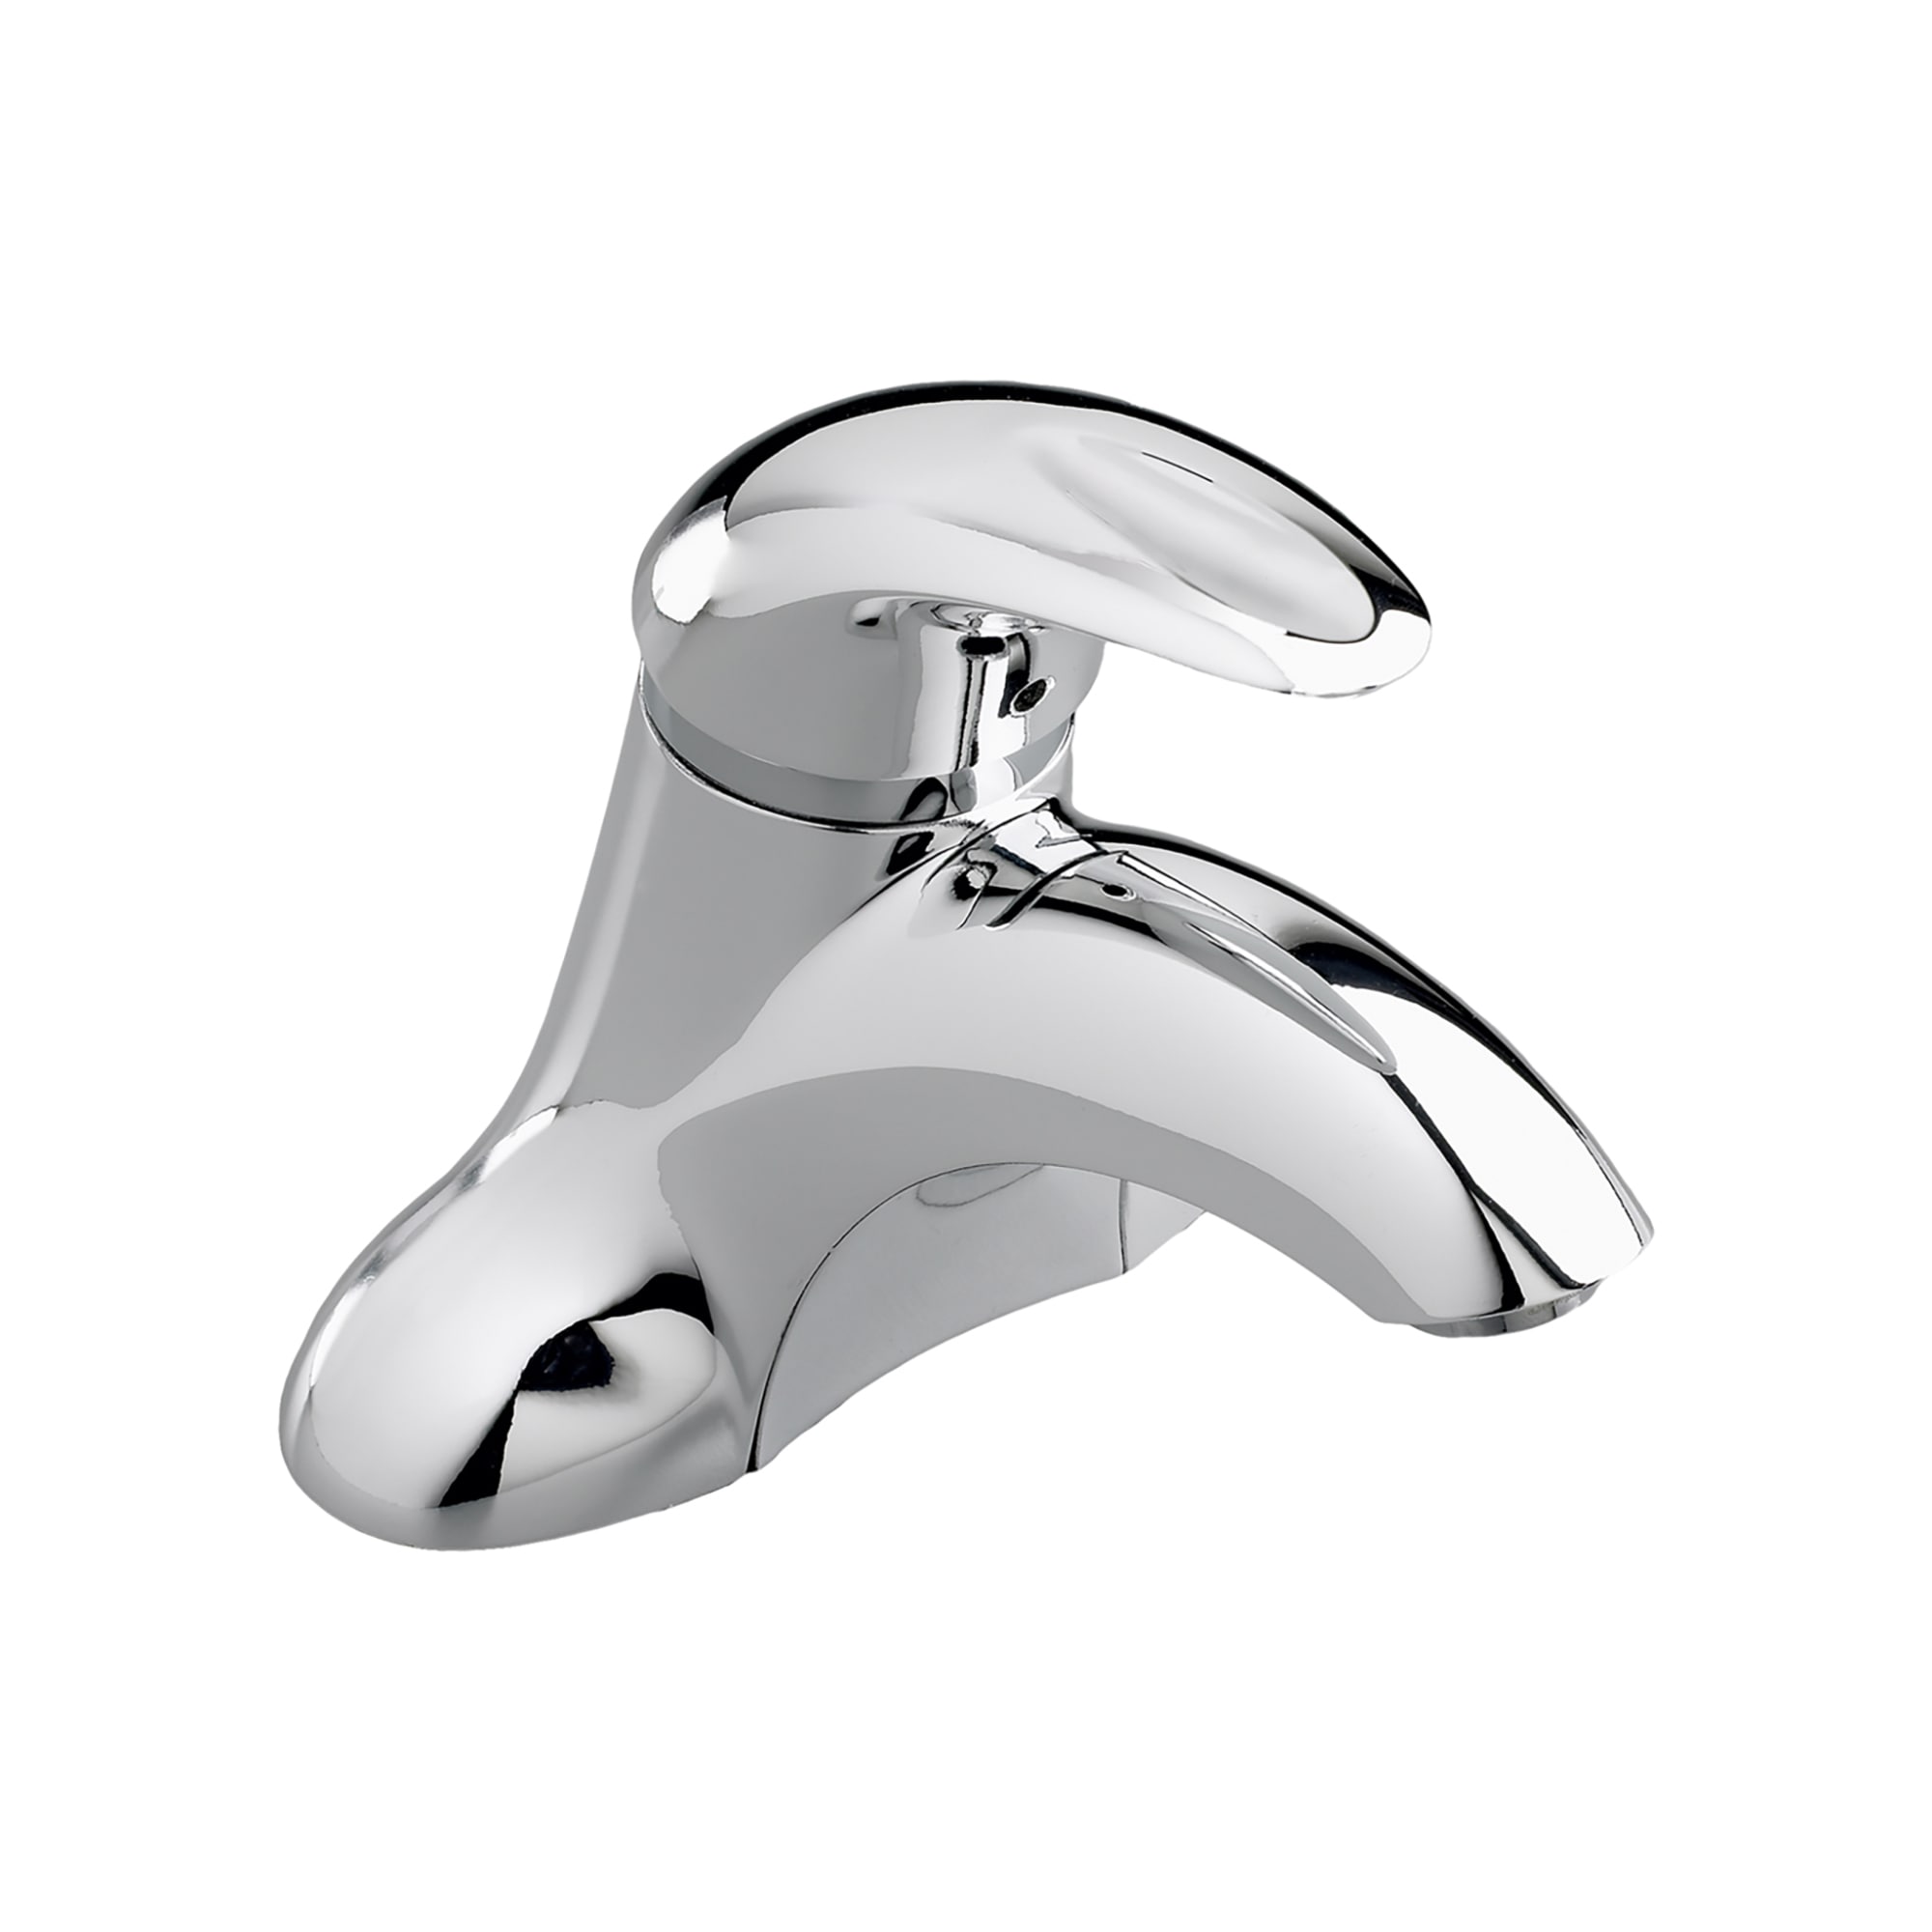 American Standard Reliant 3 Polished Chrome Single Hole 1-Handle WaterSense Bathroom Sink Faucet with Drain